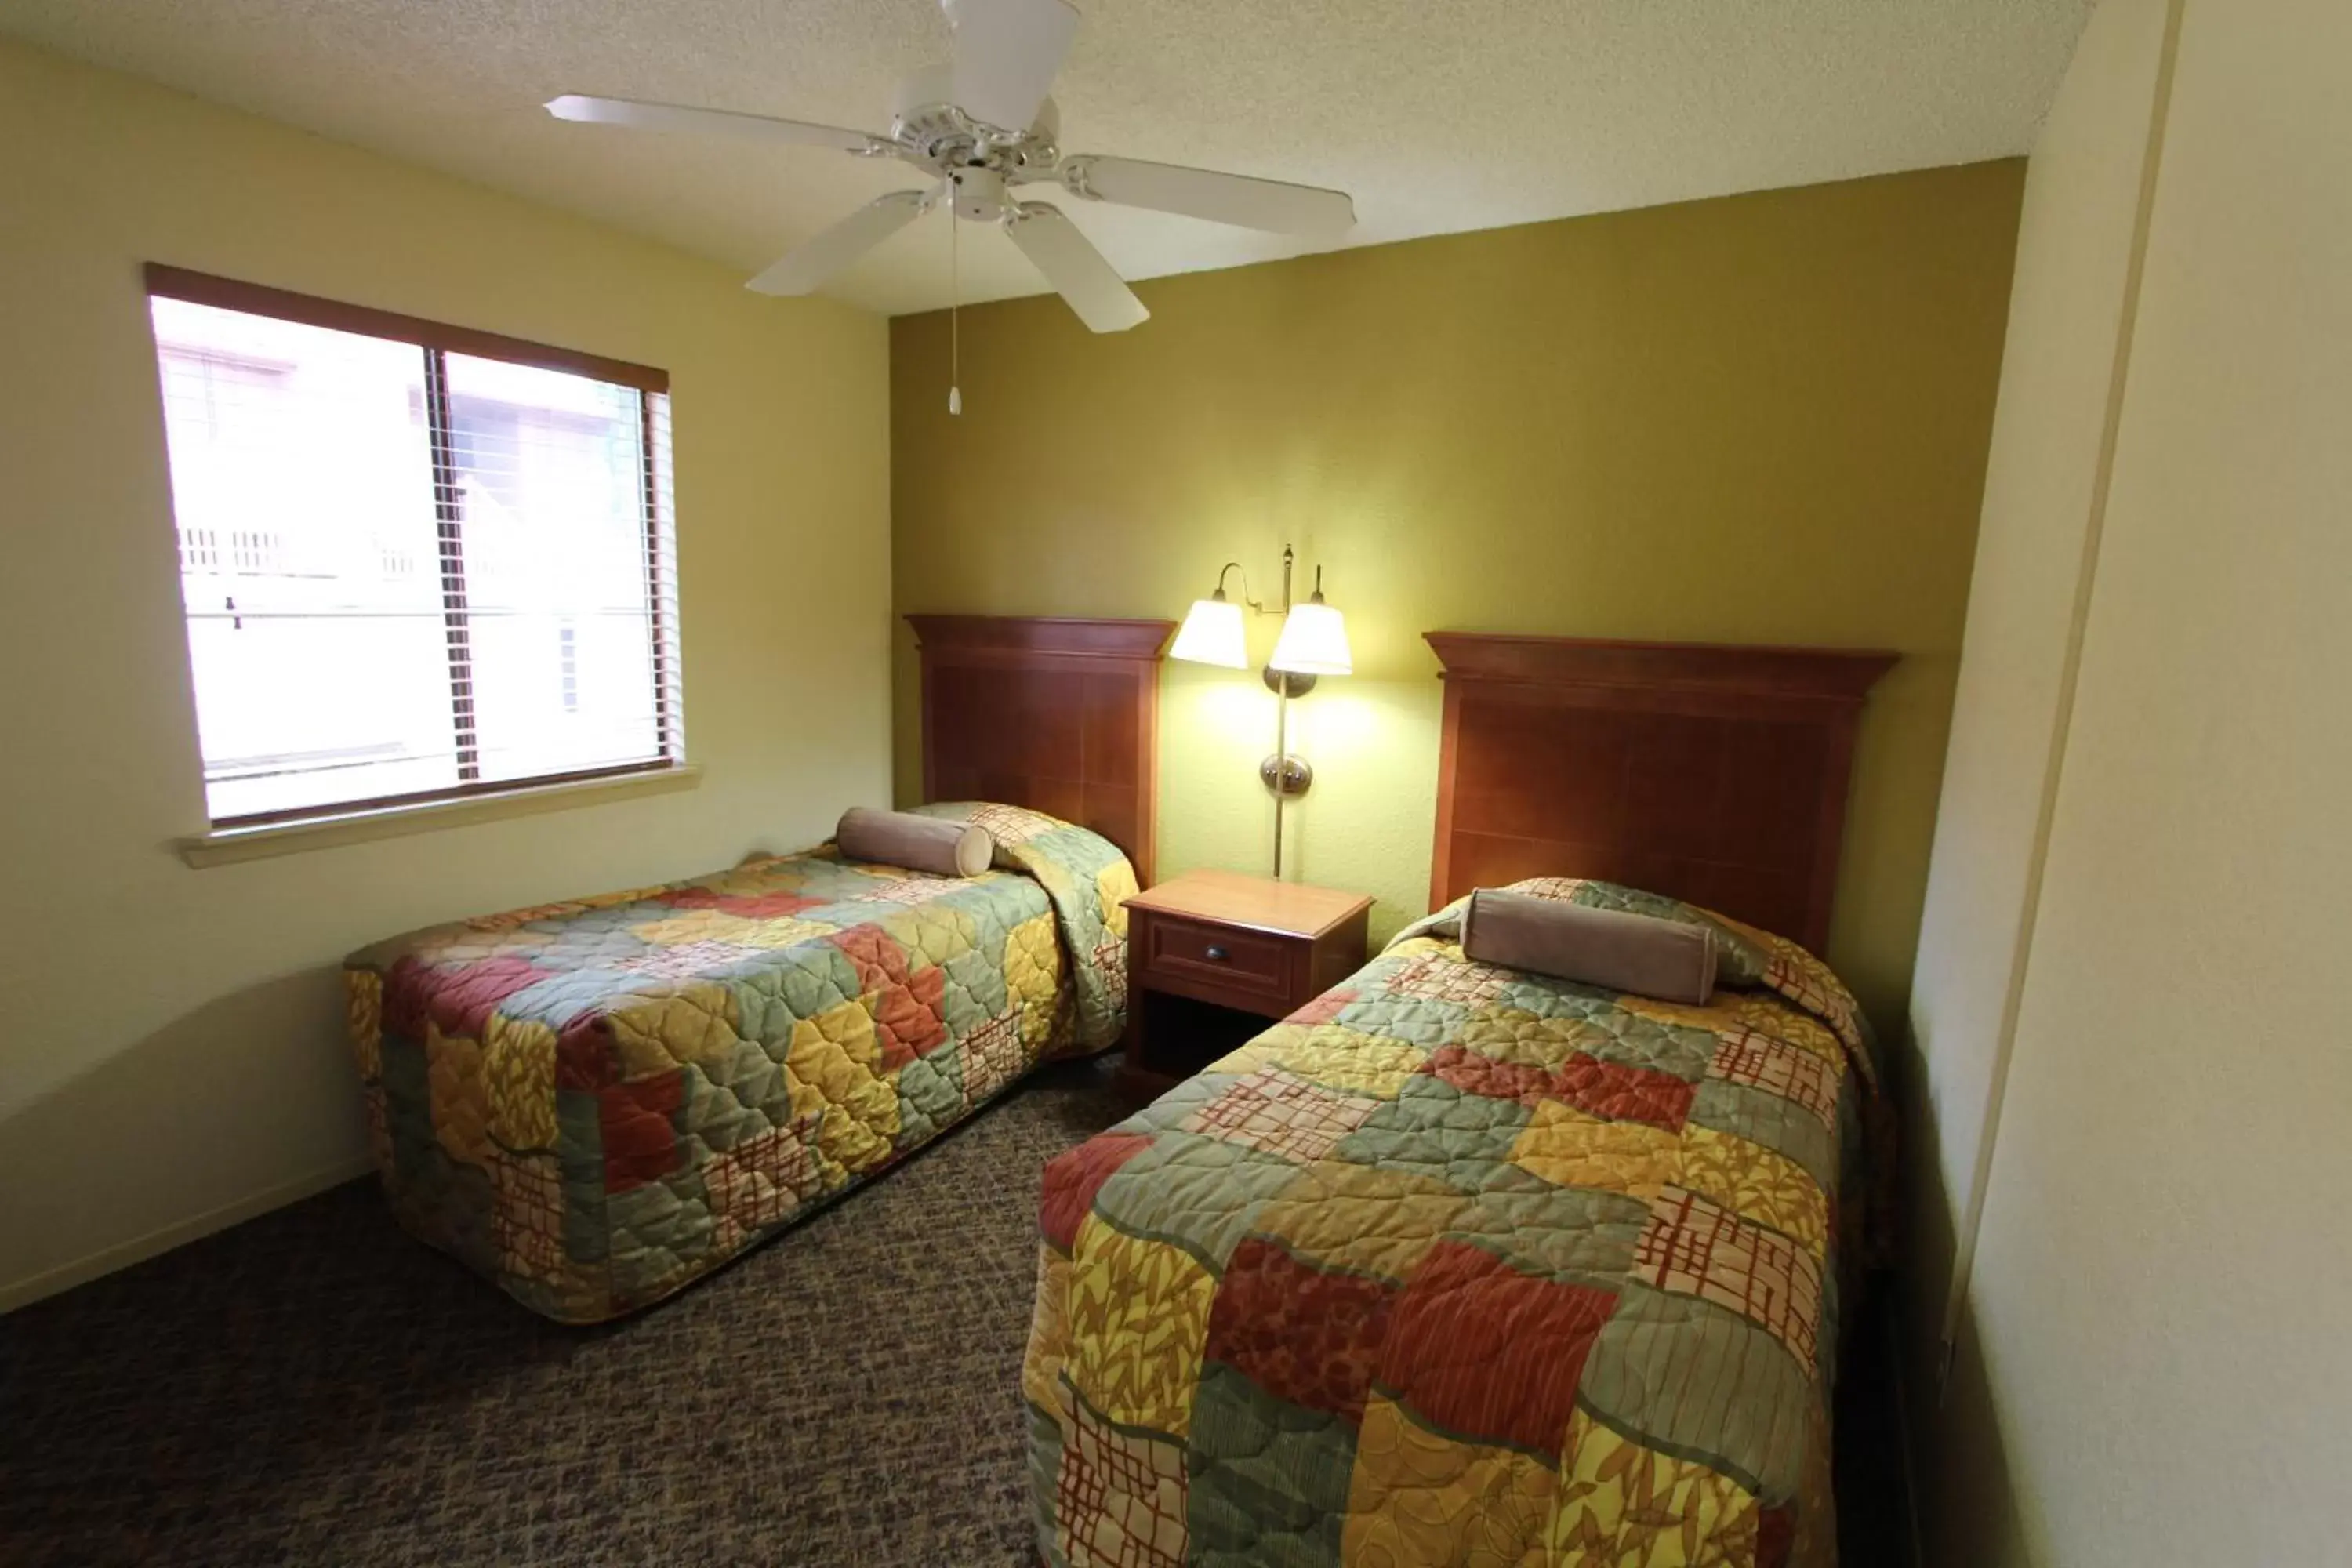 Bed, Room Photo in Crown Point Resort, by VRI Americas